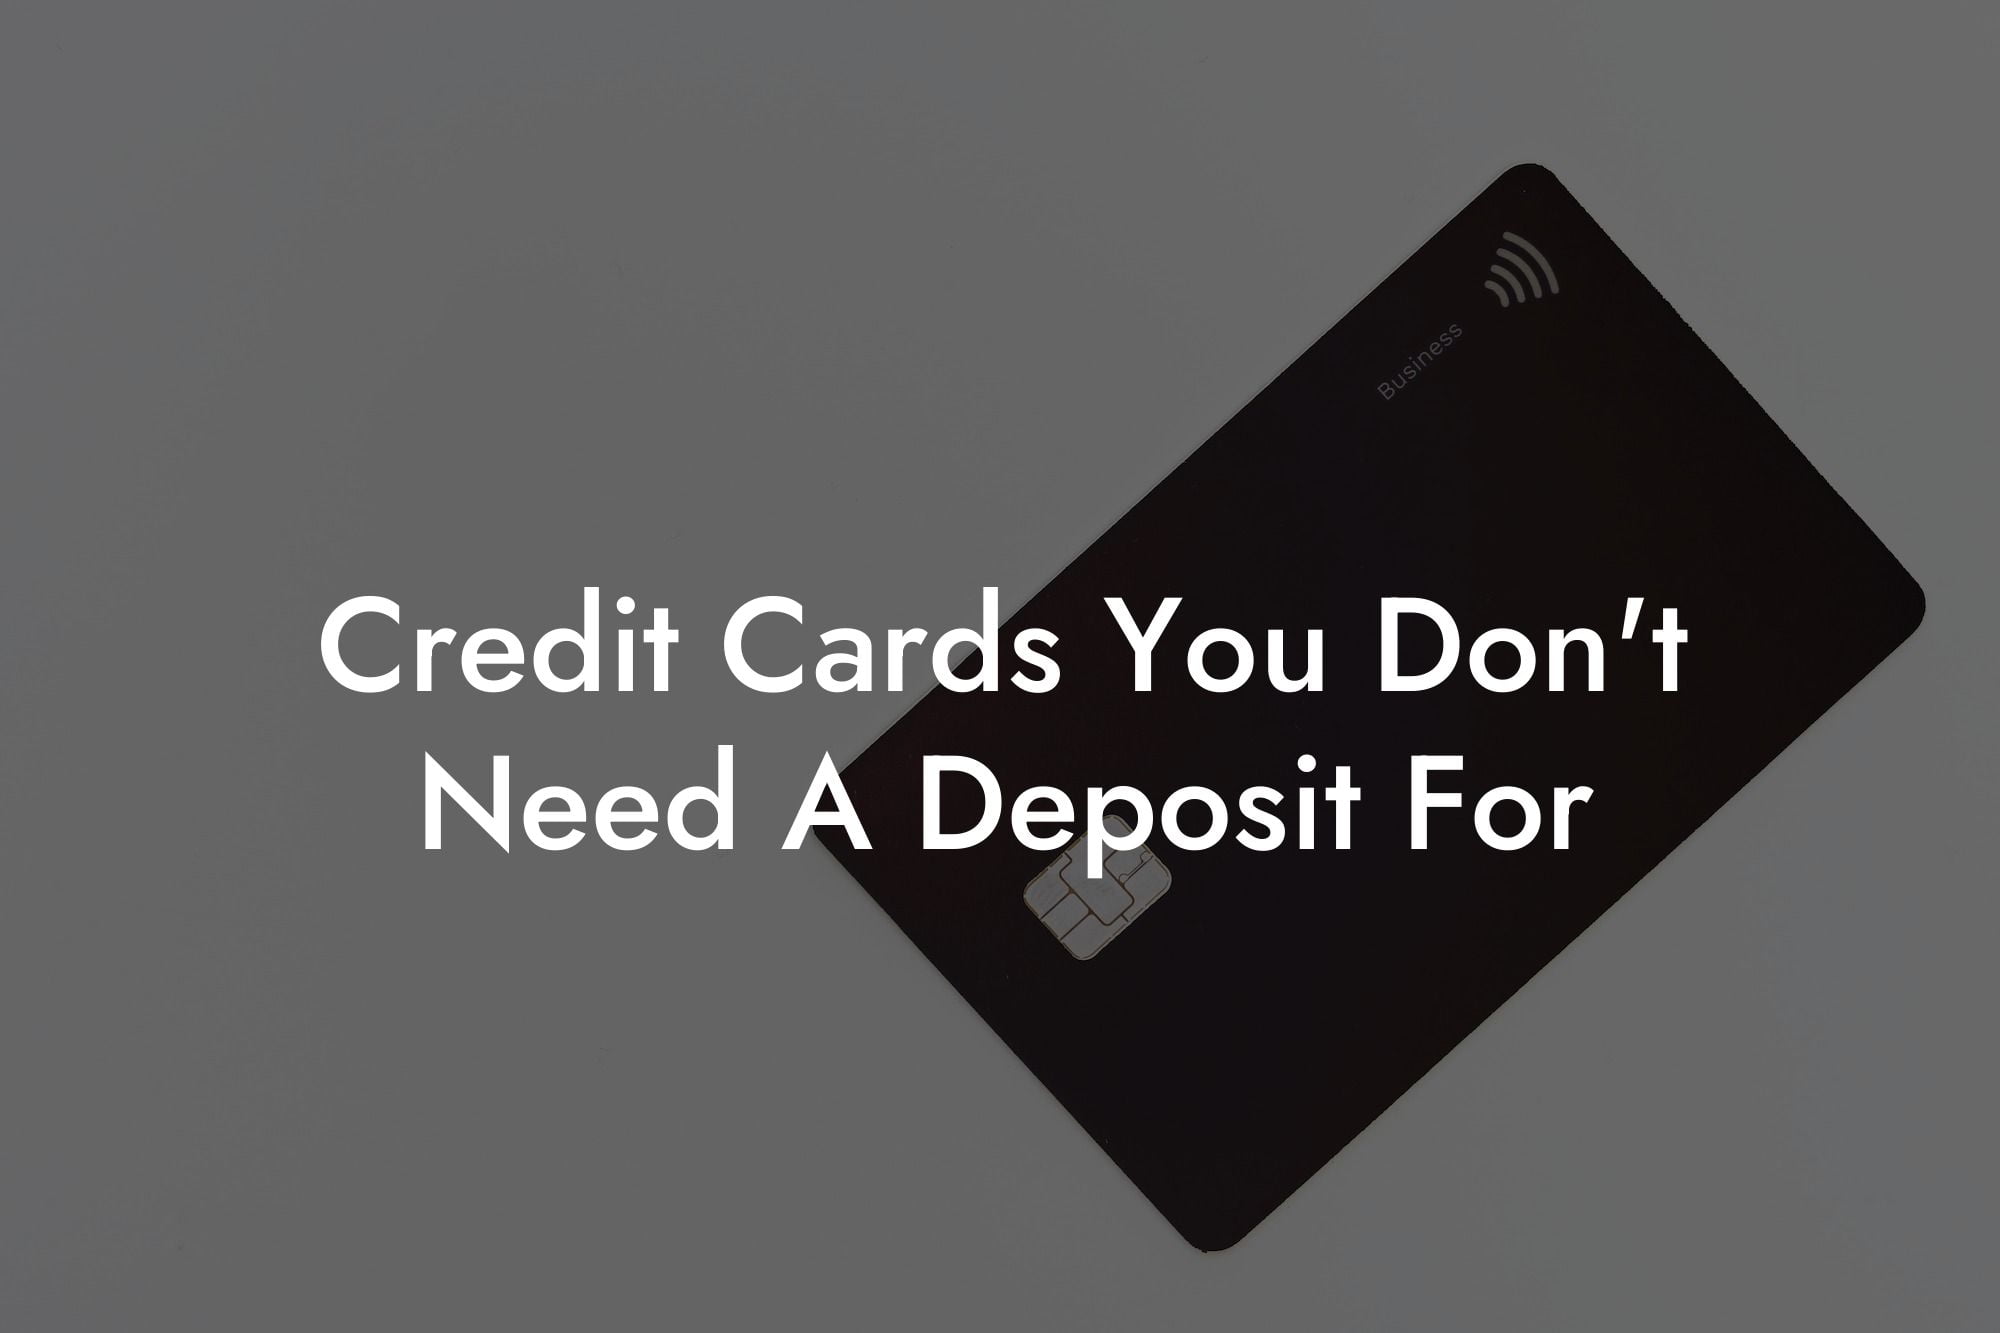 Credit Cards You Don't Need A Deposit For